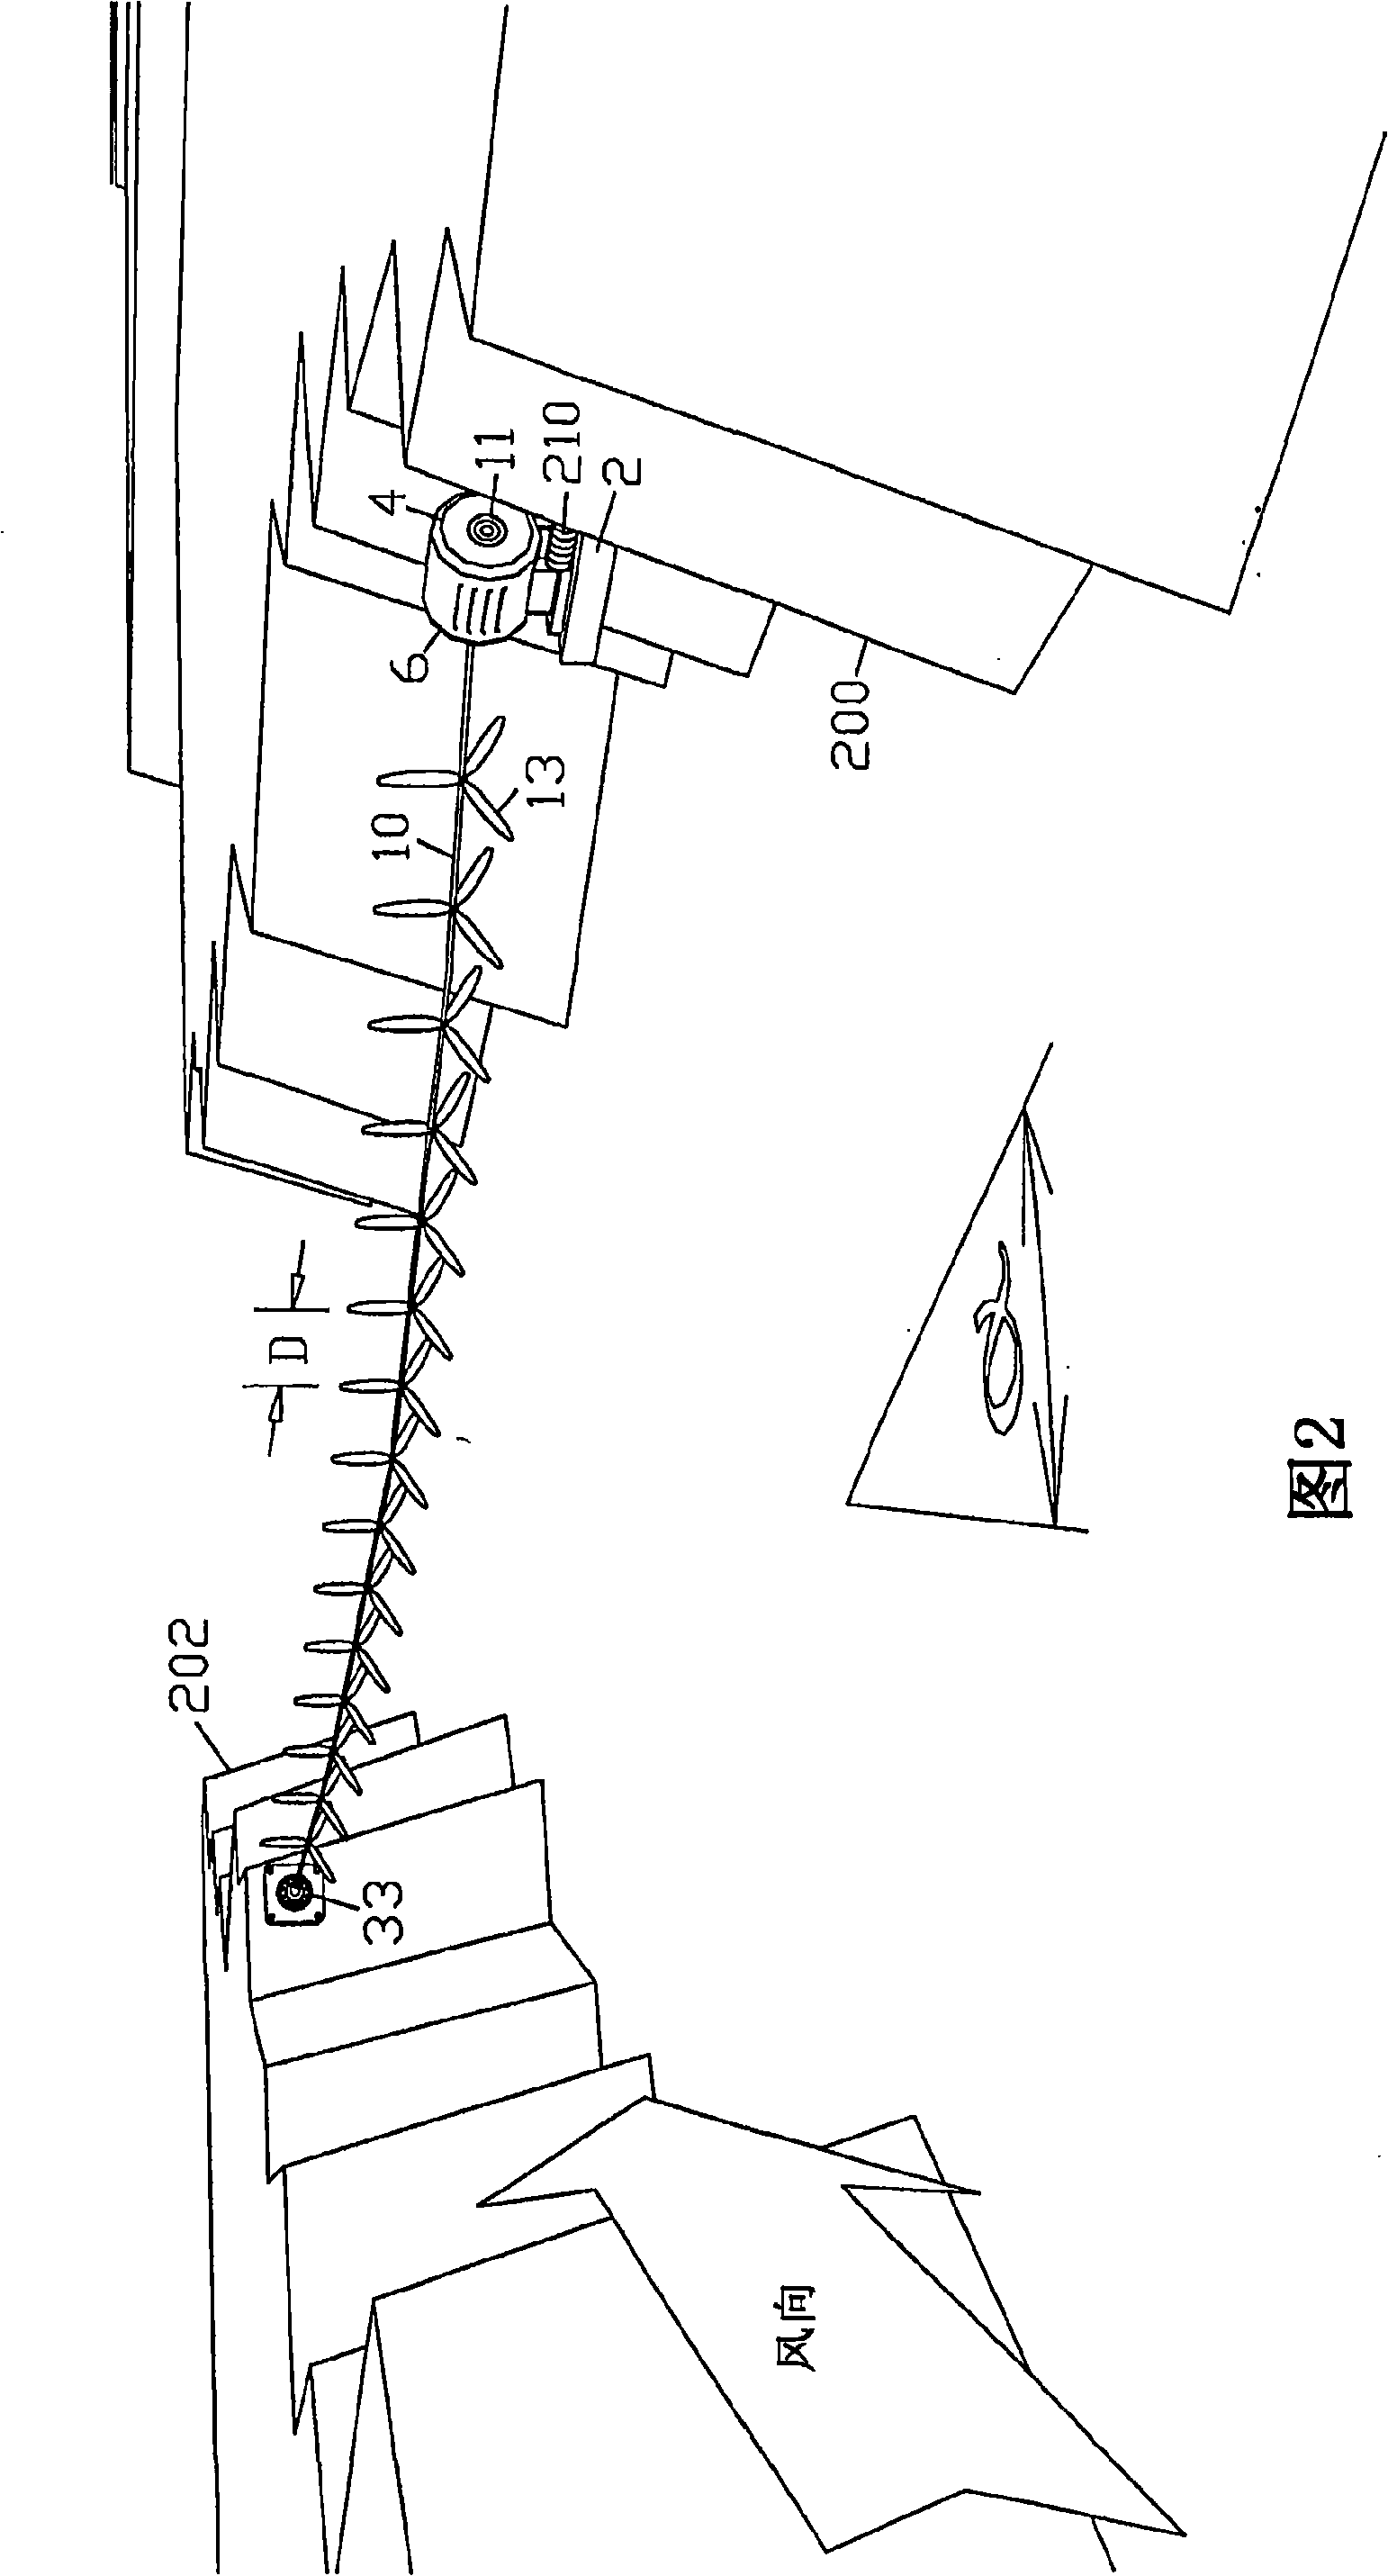 Multi-rotor wind turbine supported by continuous central driveshaft